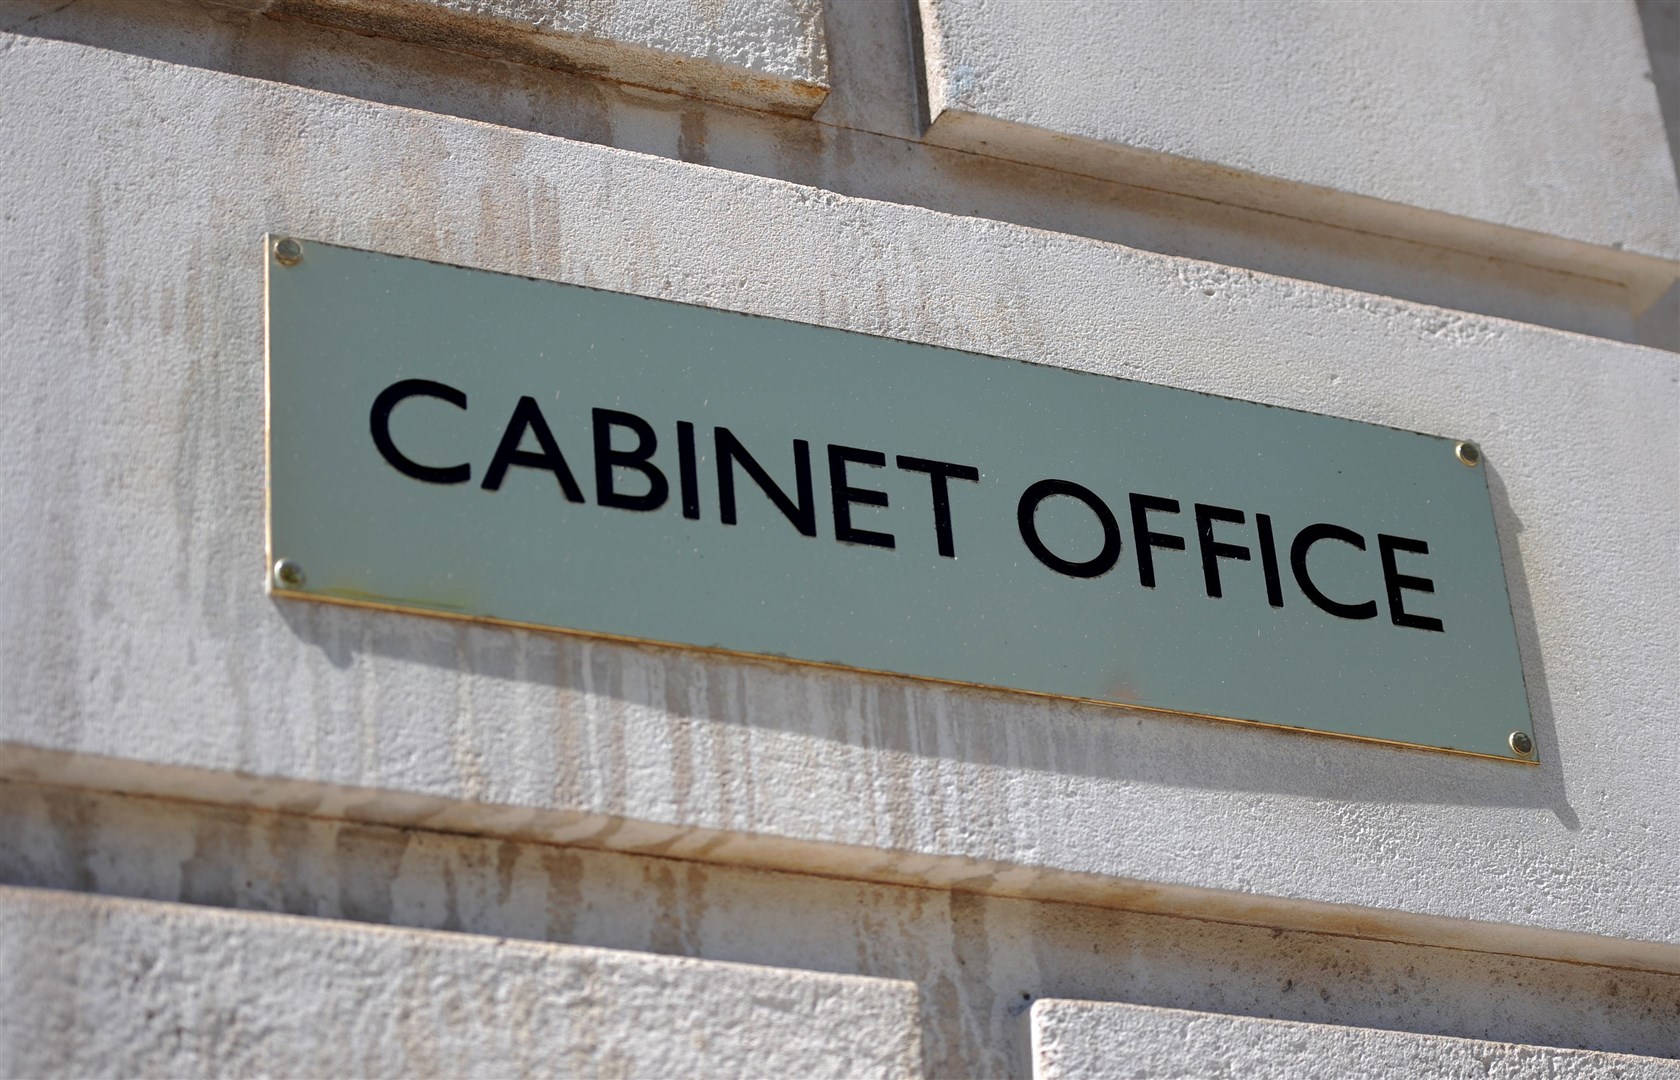 A quiz was held by staff in the Cabinet Office (Lauren Hurley/PA)